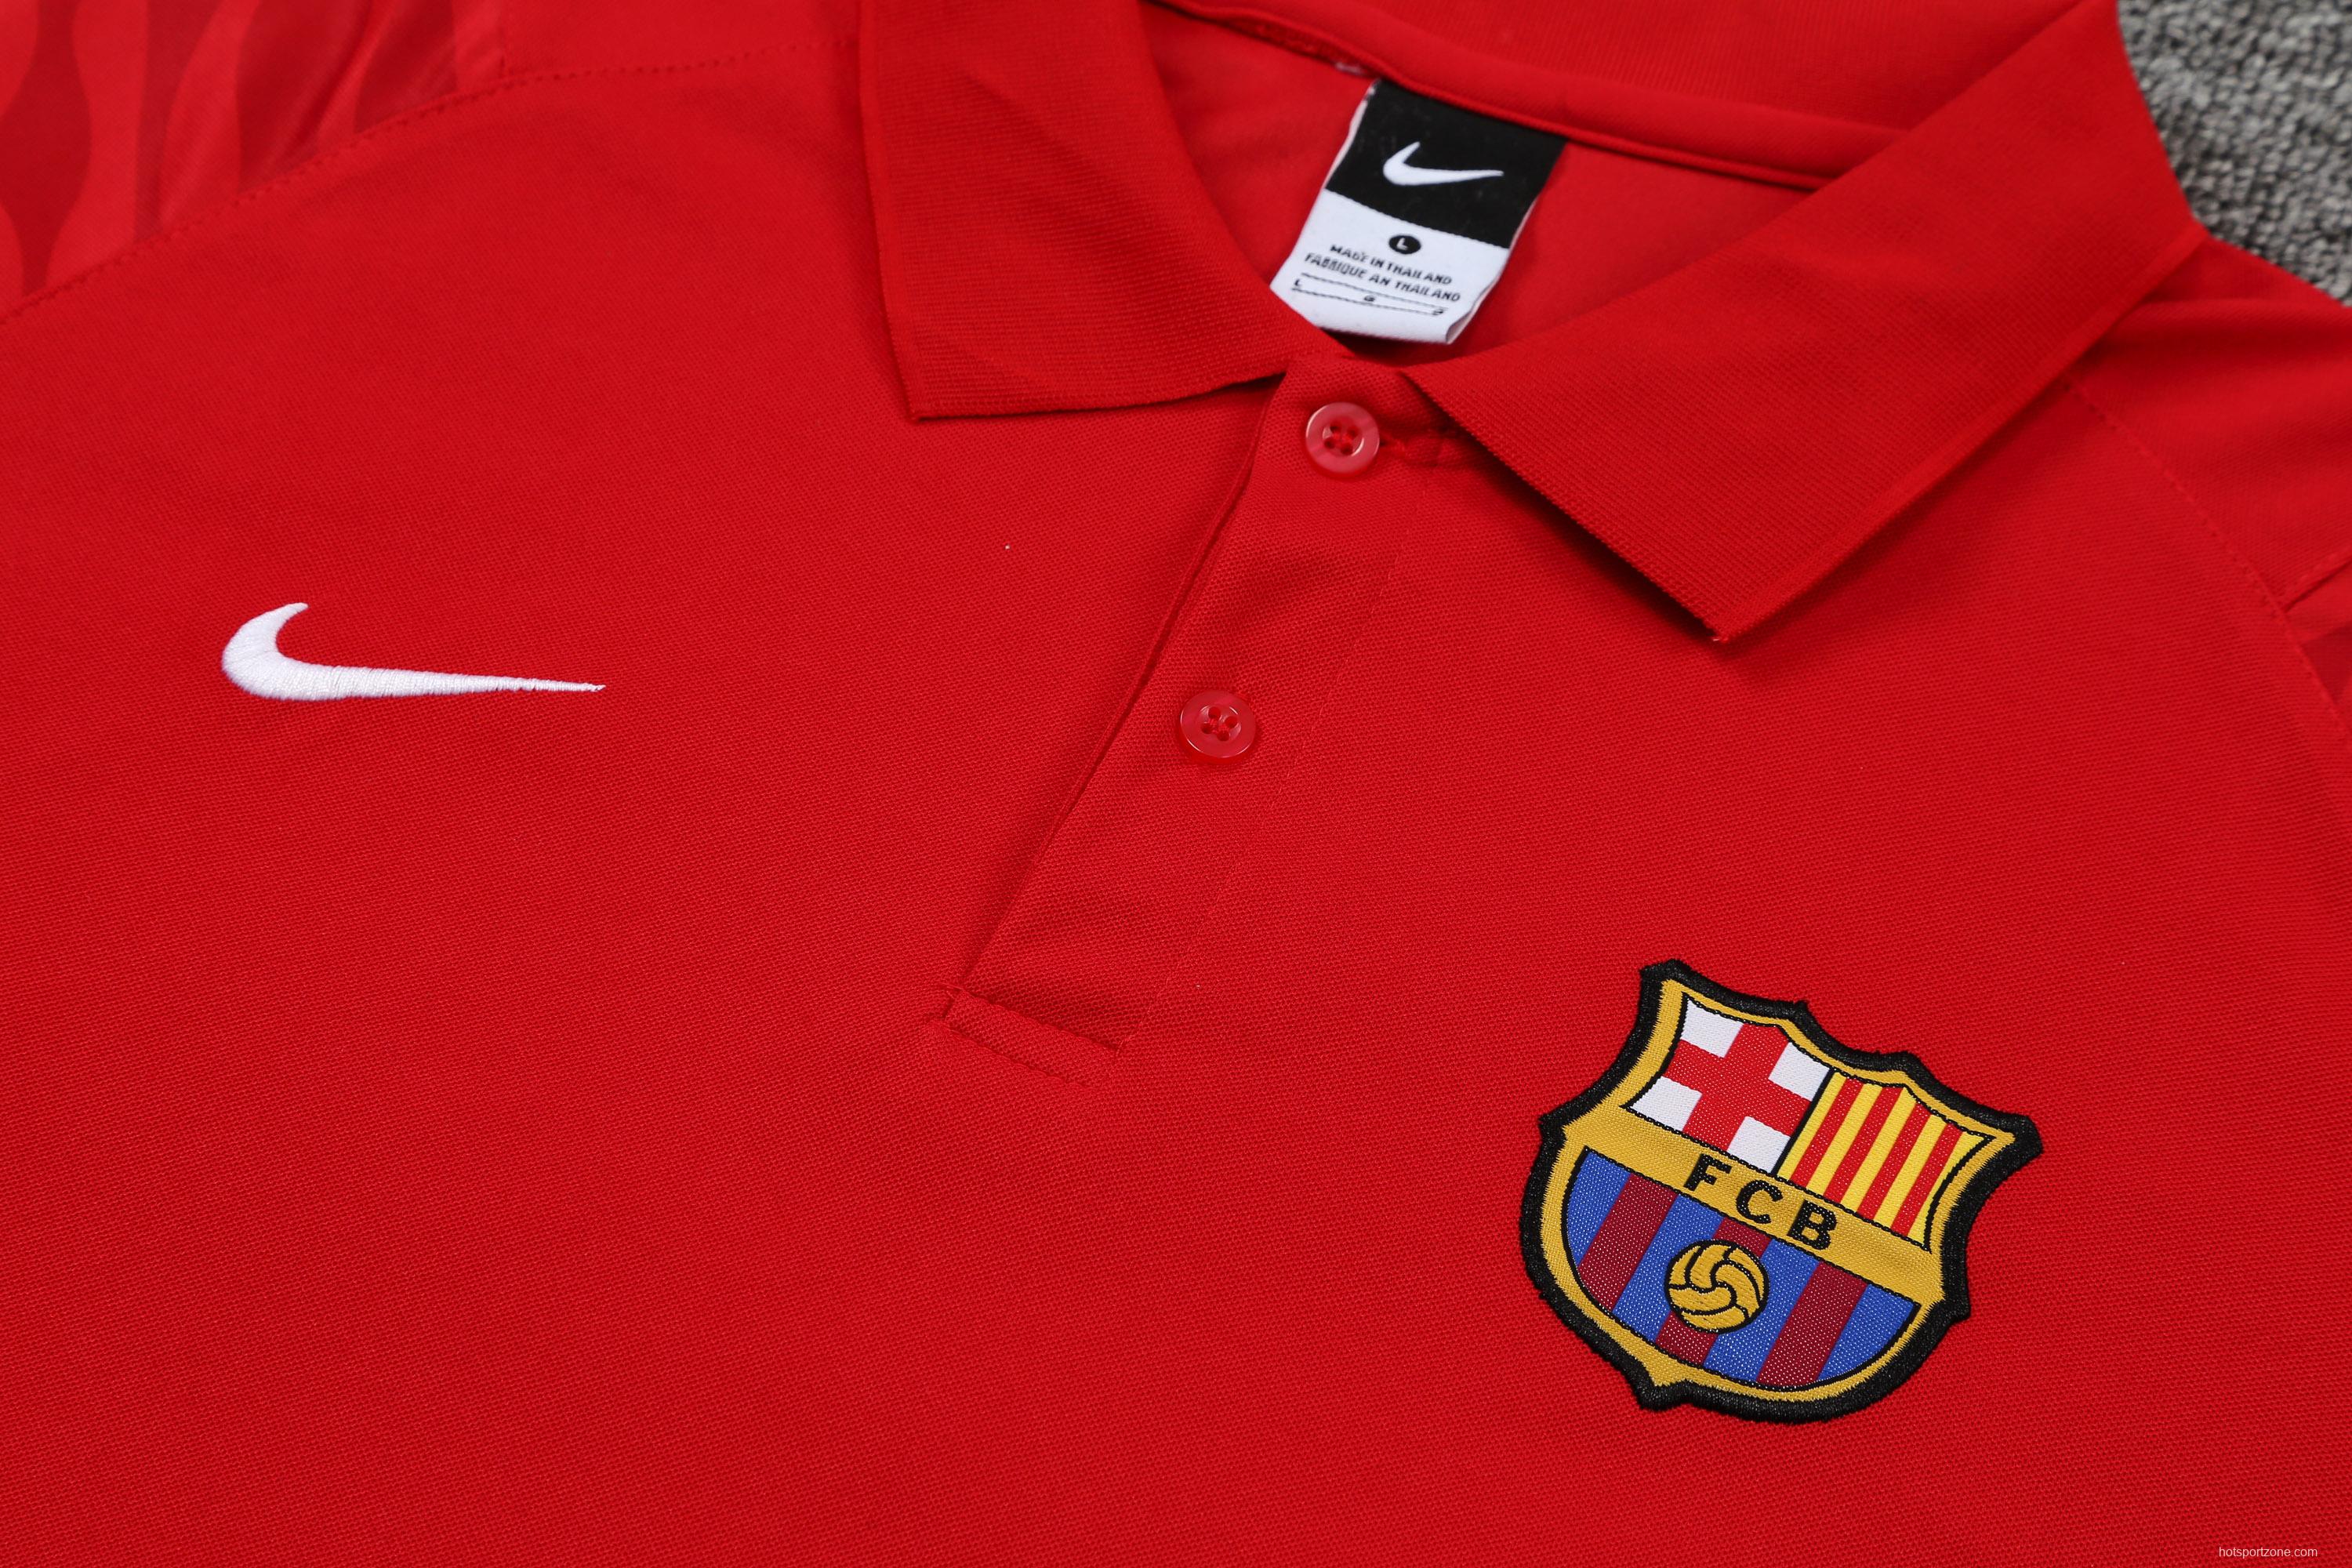 Barcelona POLO kit red blue (not supported to be sold separately)